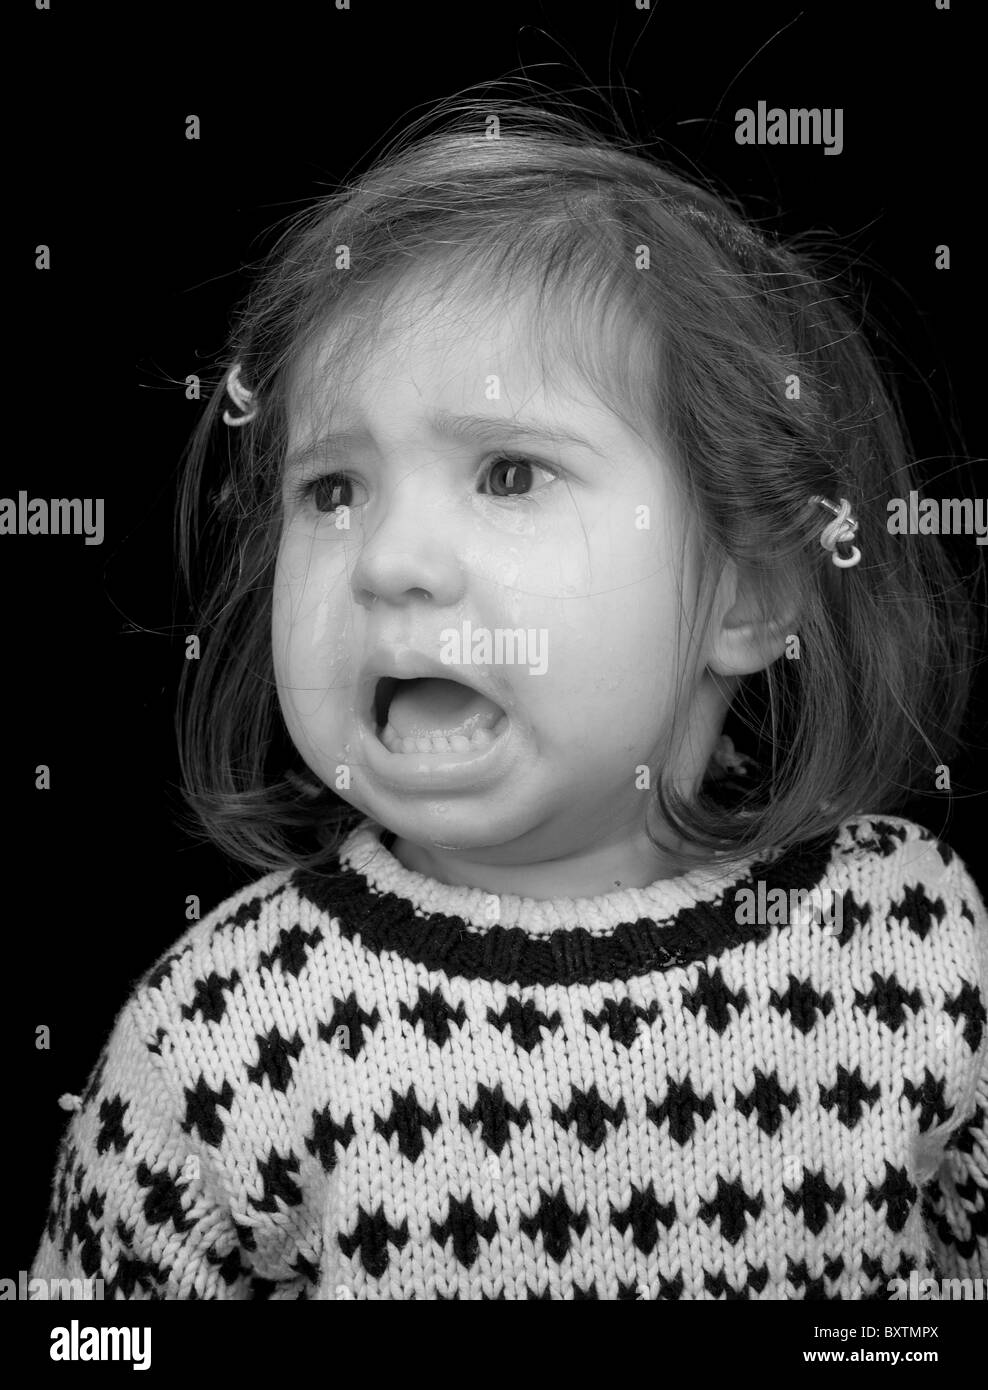 B&W portrait of a young girl crying Stock Photo